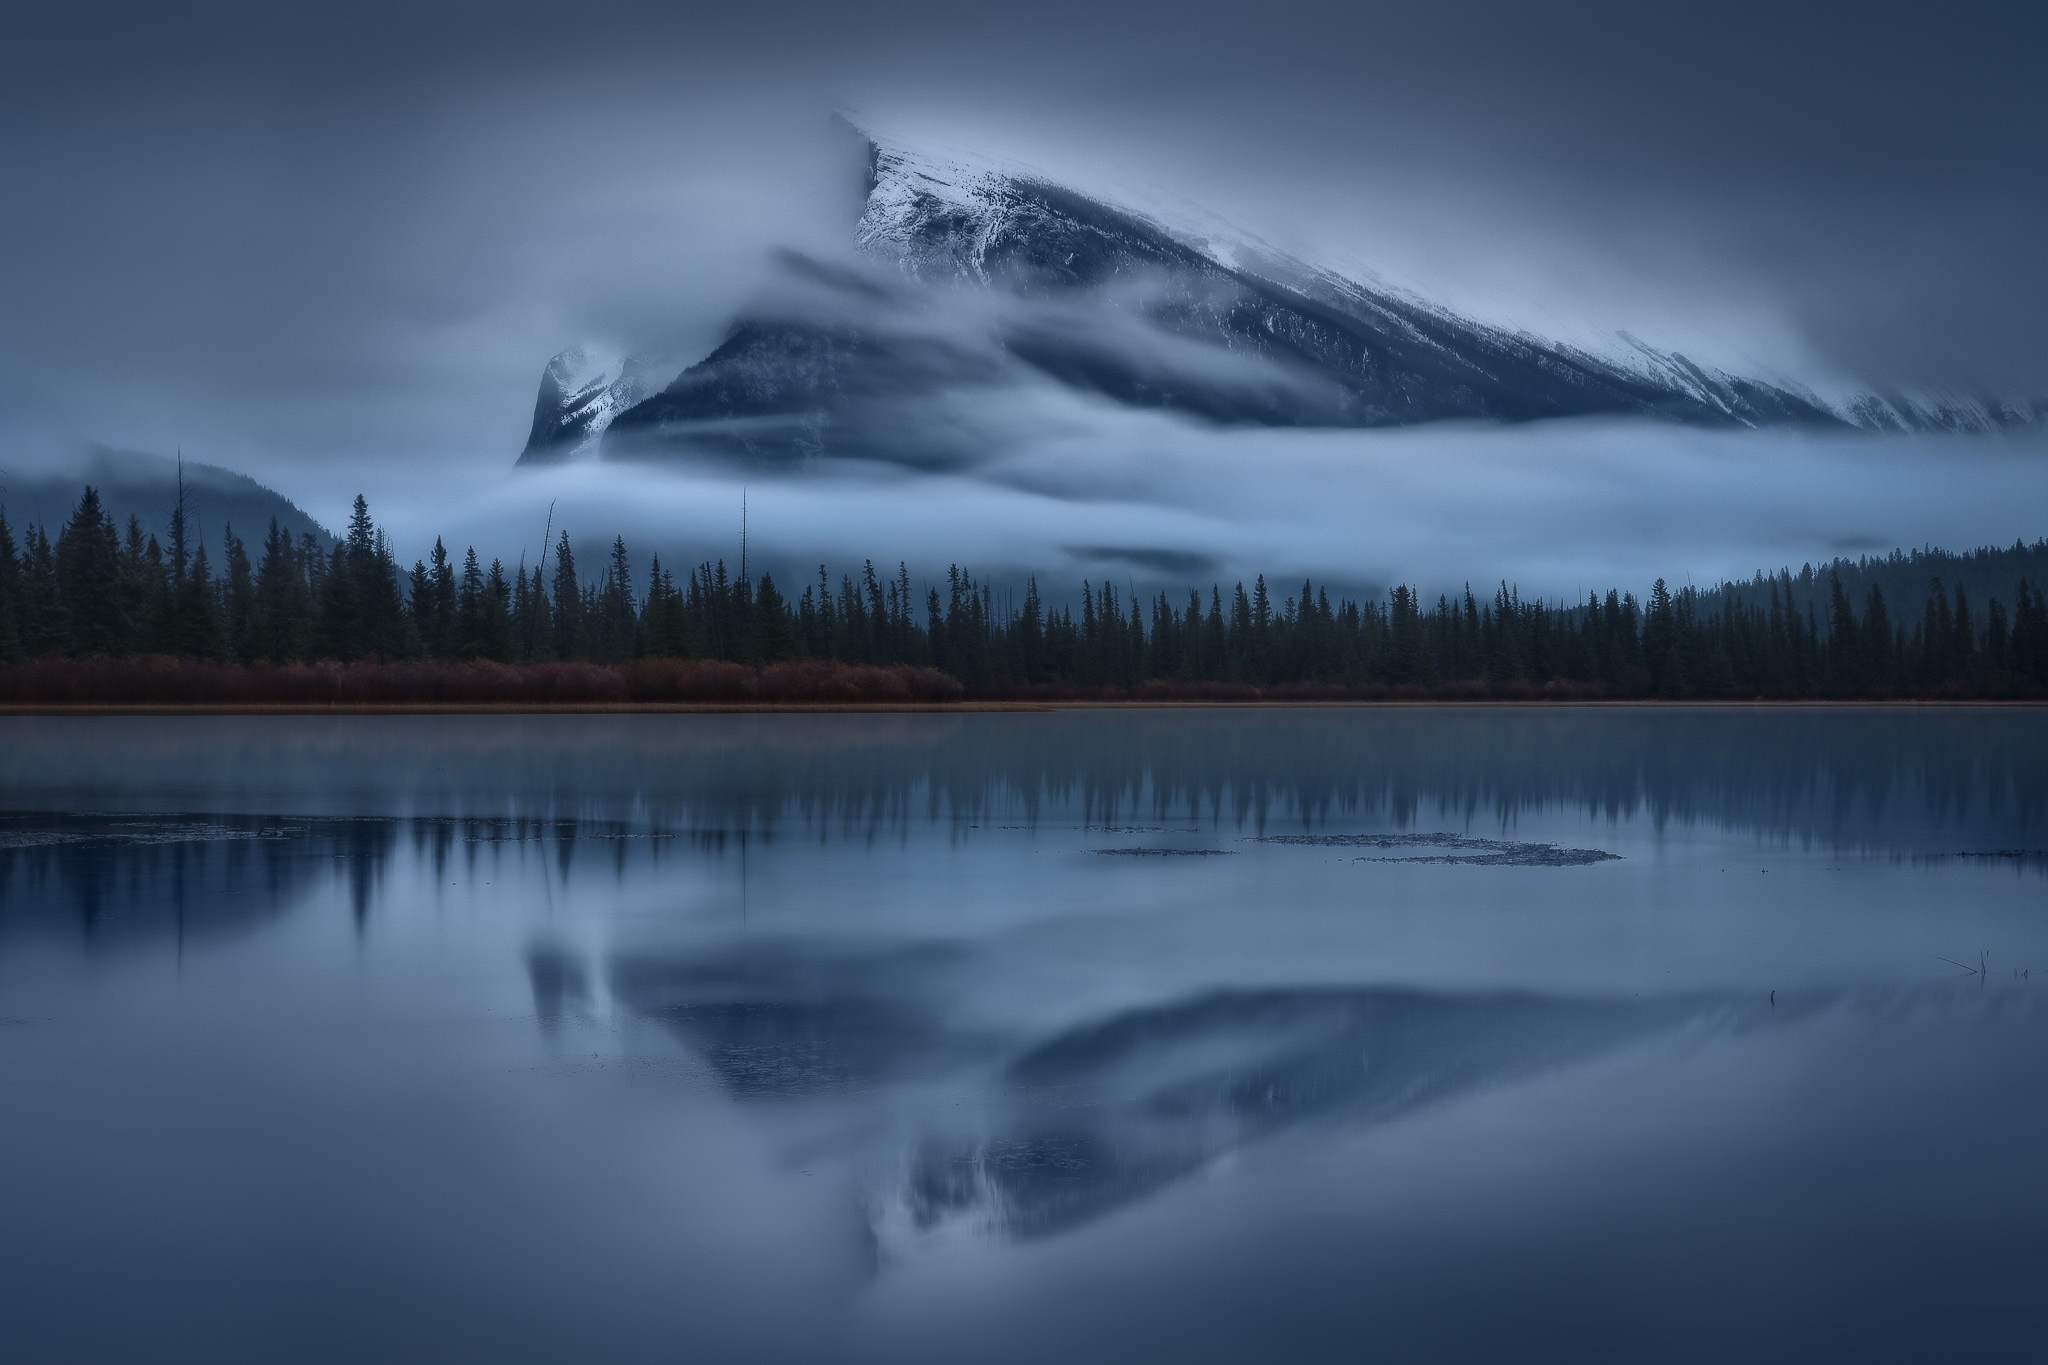 General 2048x1365 nature landscape mountains clouds Alberta Canada lake trees forest water mist reflection long exposure snowy peak Mount Rundle morning Banff National Park